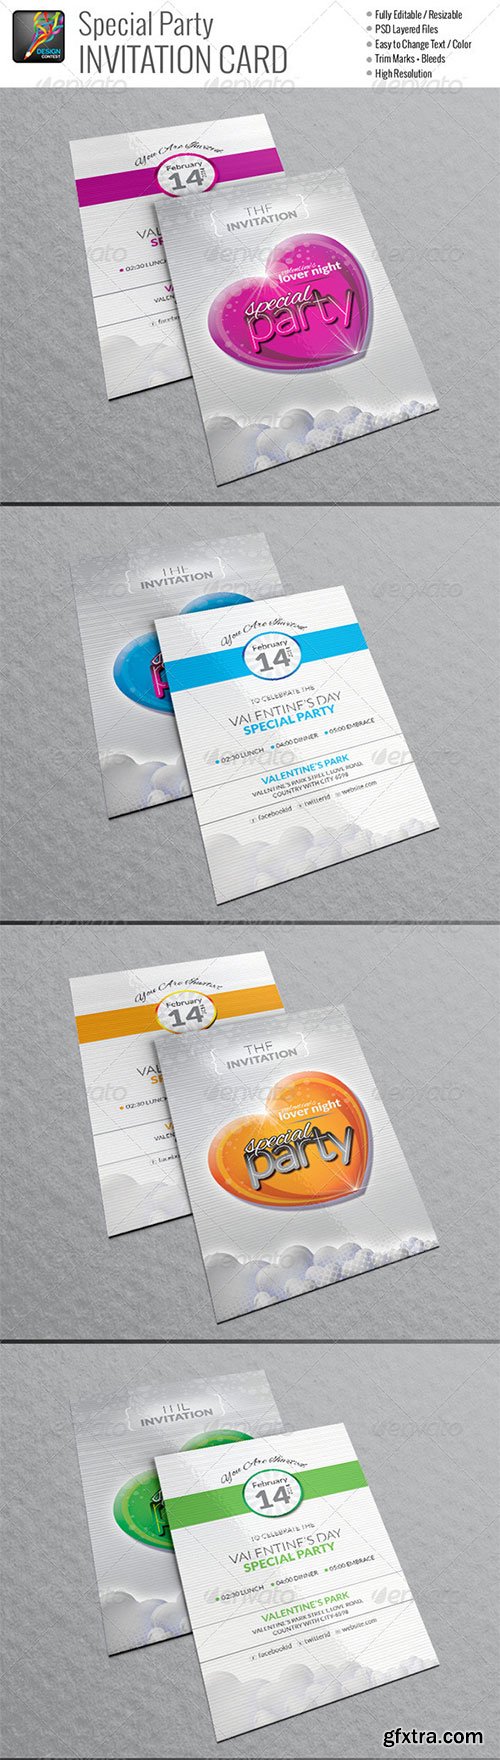 GraphicRiver - Special Party Invitation Cards